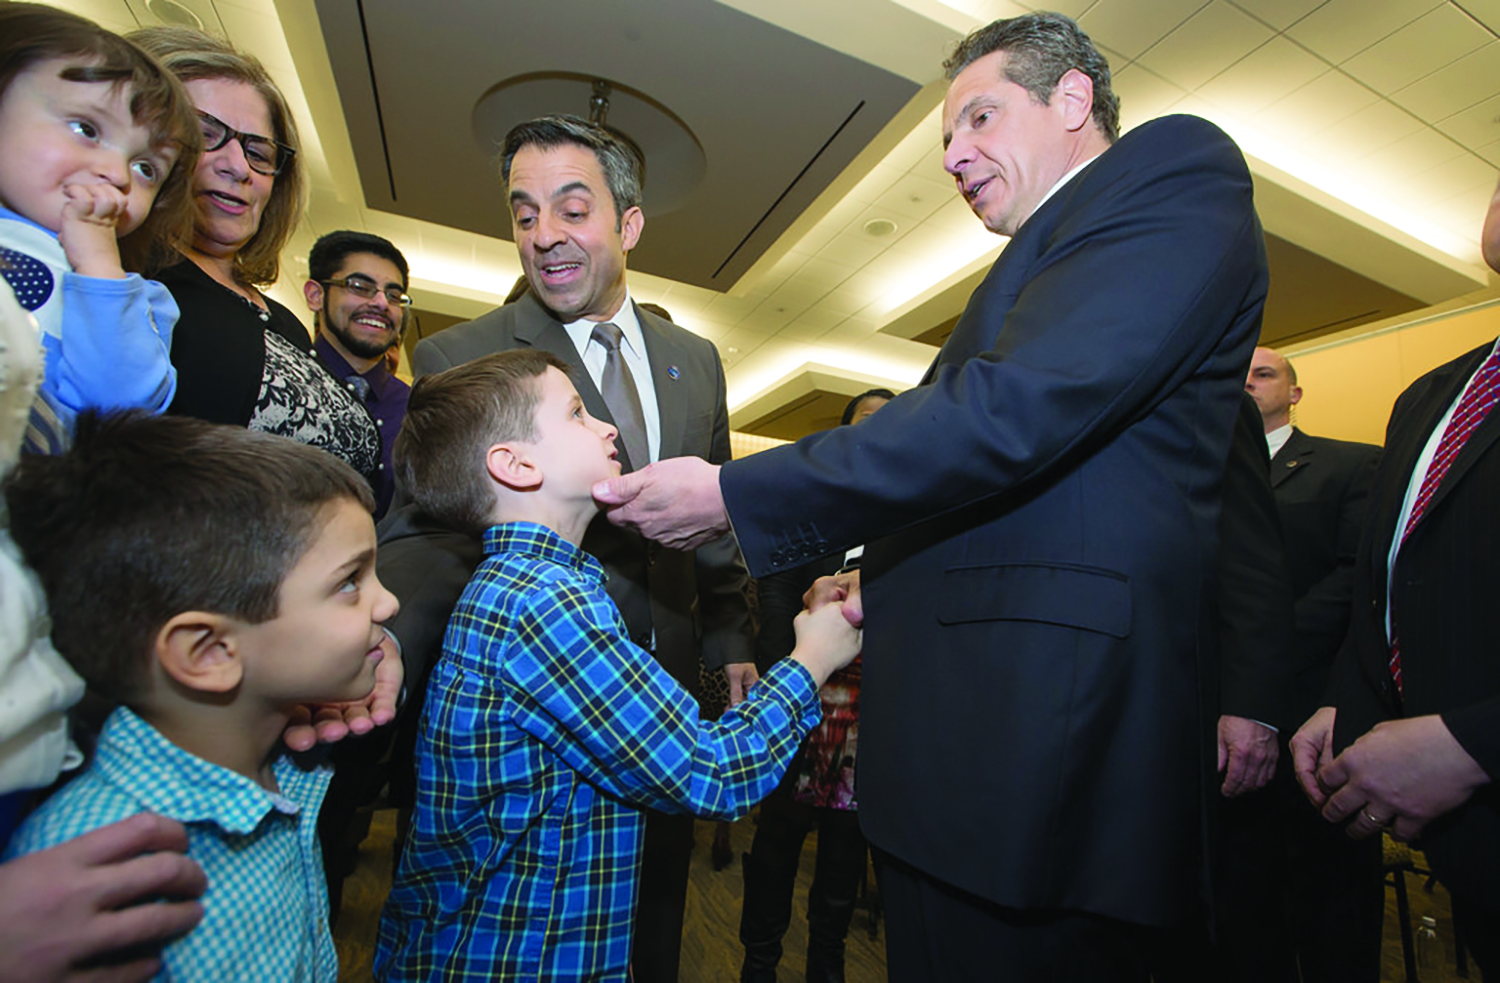 Gov. Cuomo loves the little children. He wants them to have a bright future, which is why he’s spending $70 million on the state-owned waterfront while reneging on tens of millions in aid promised for downtown Niagara Falls.